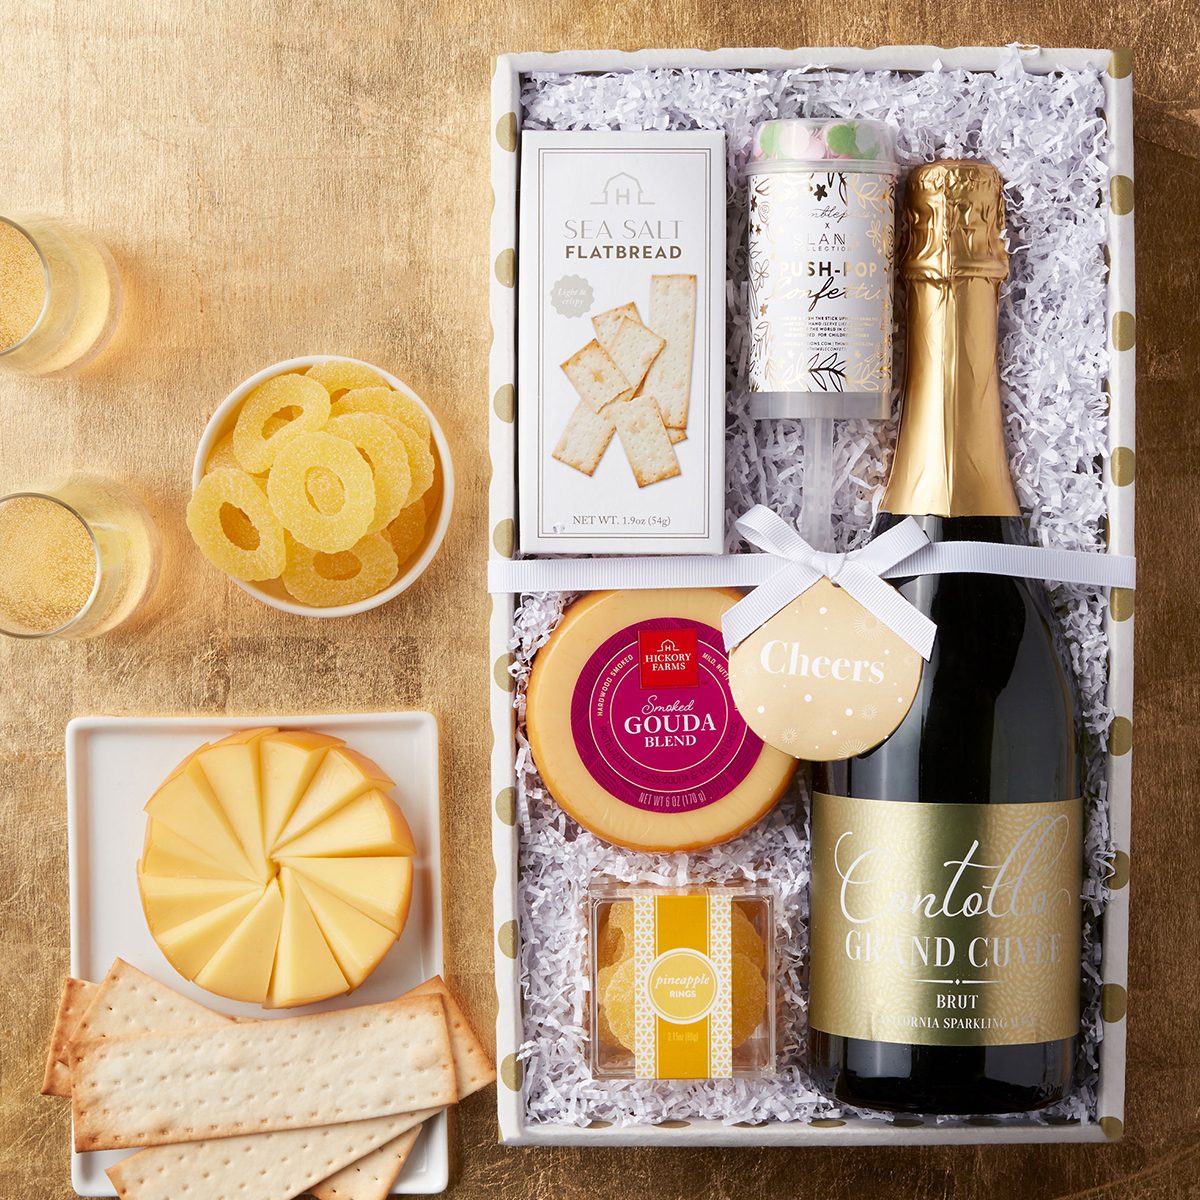 10 gorgeous gift ideas for the newly engaged couple | Independent.ie